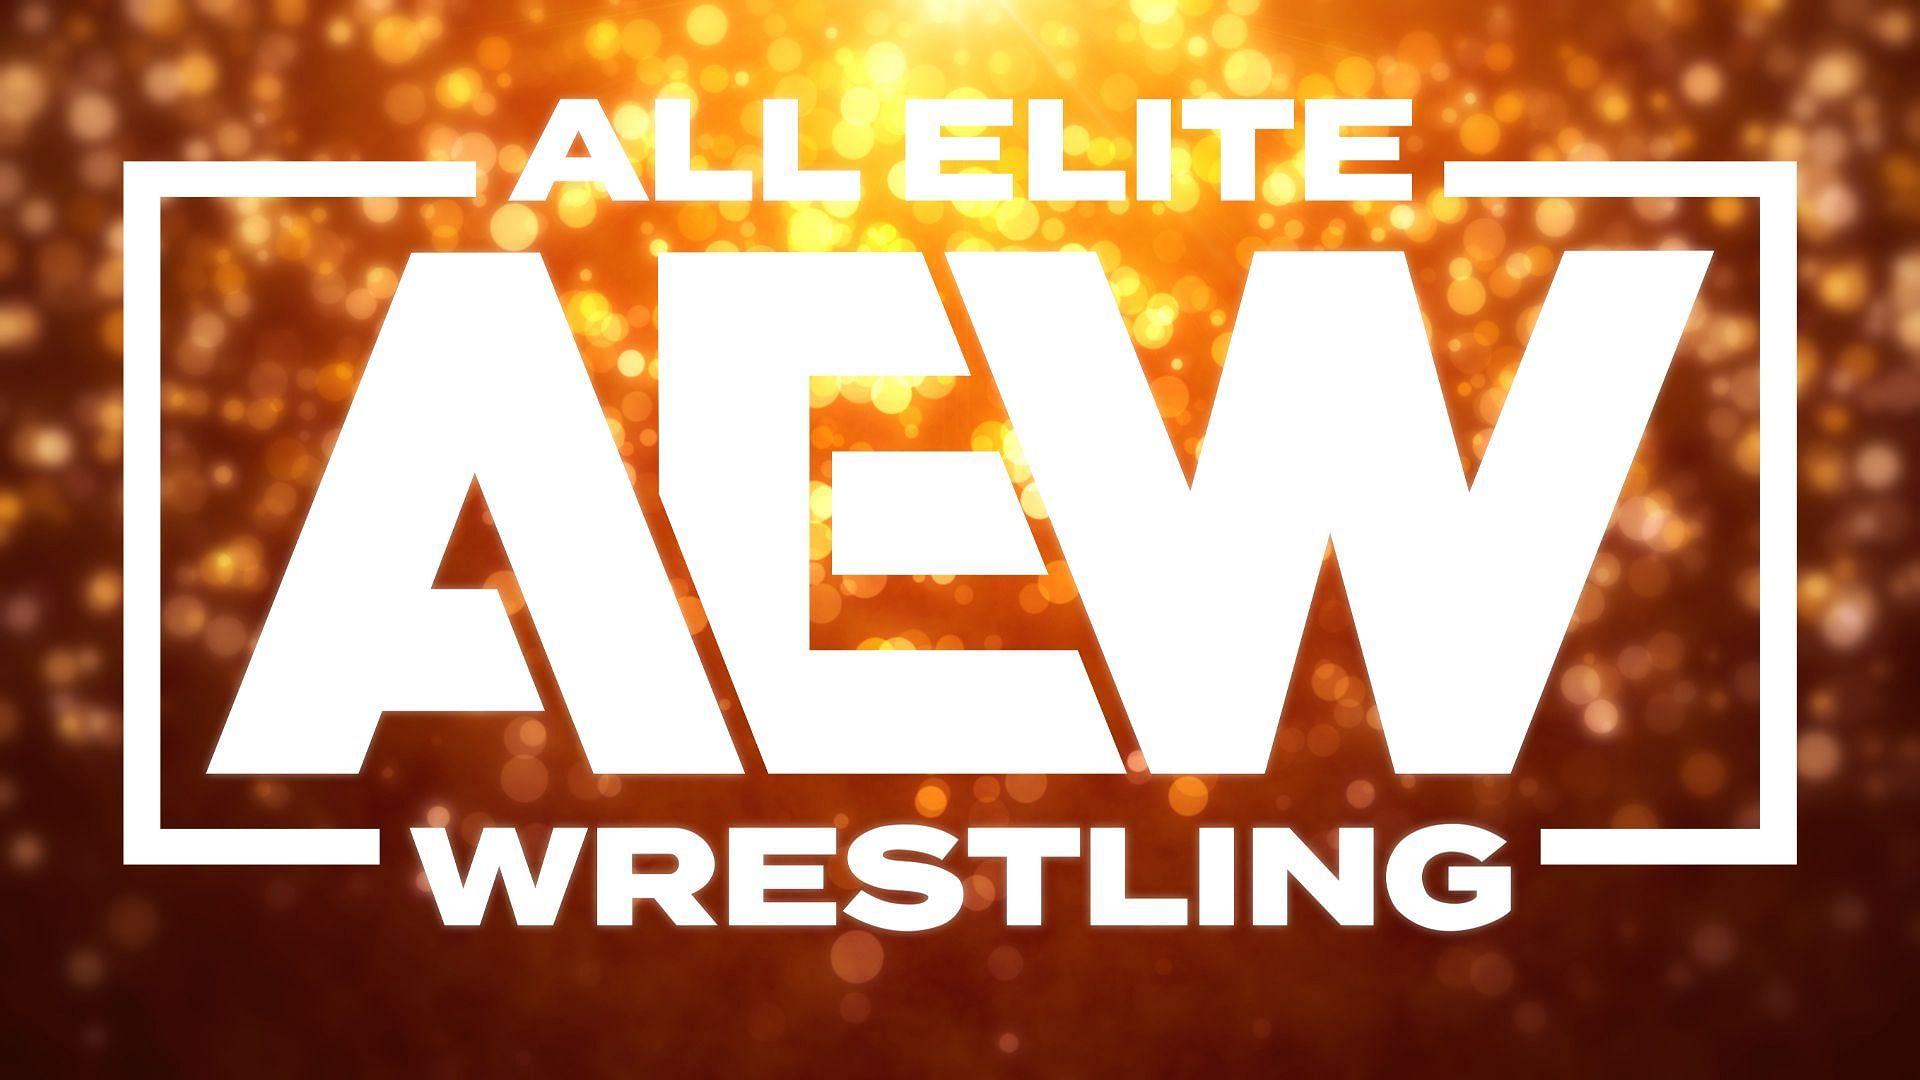 AEW recently signed a popular former WWE Superstar